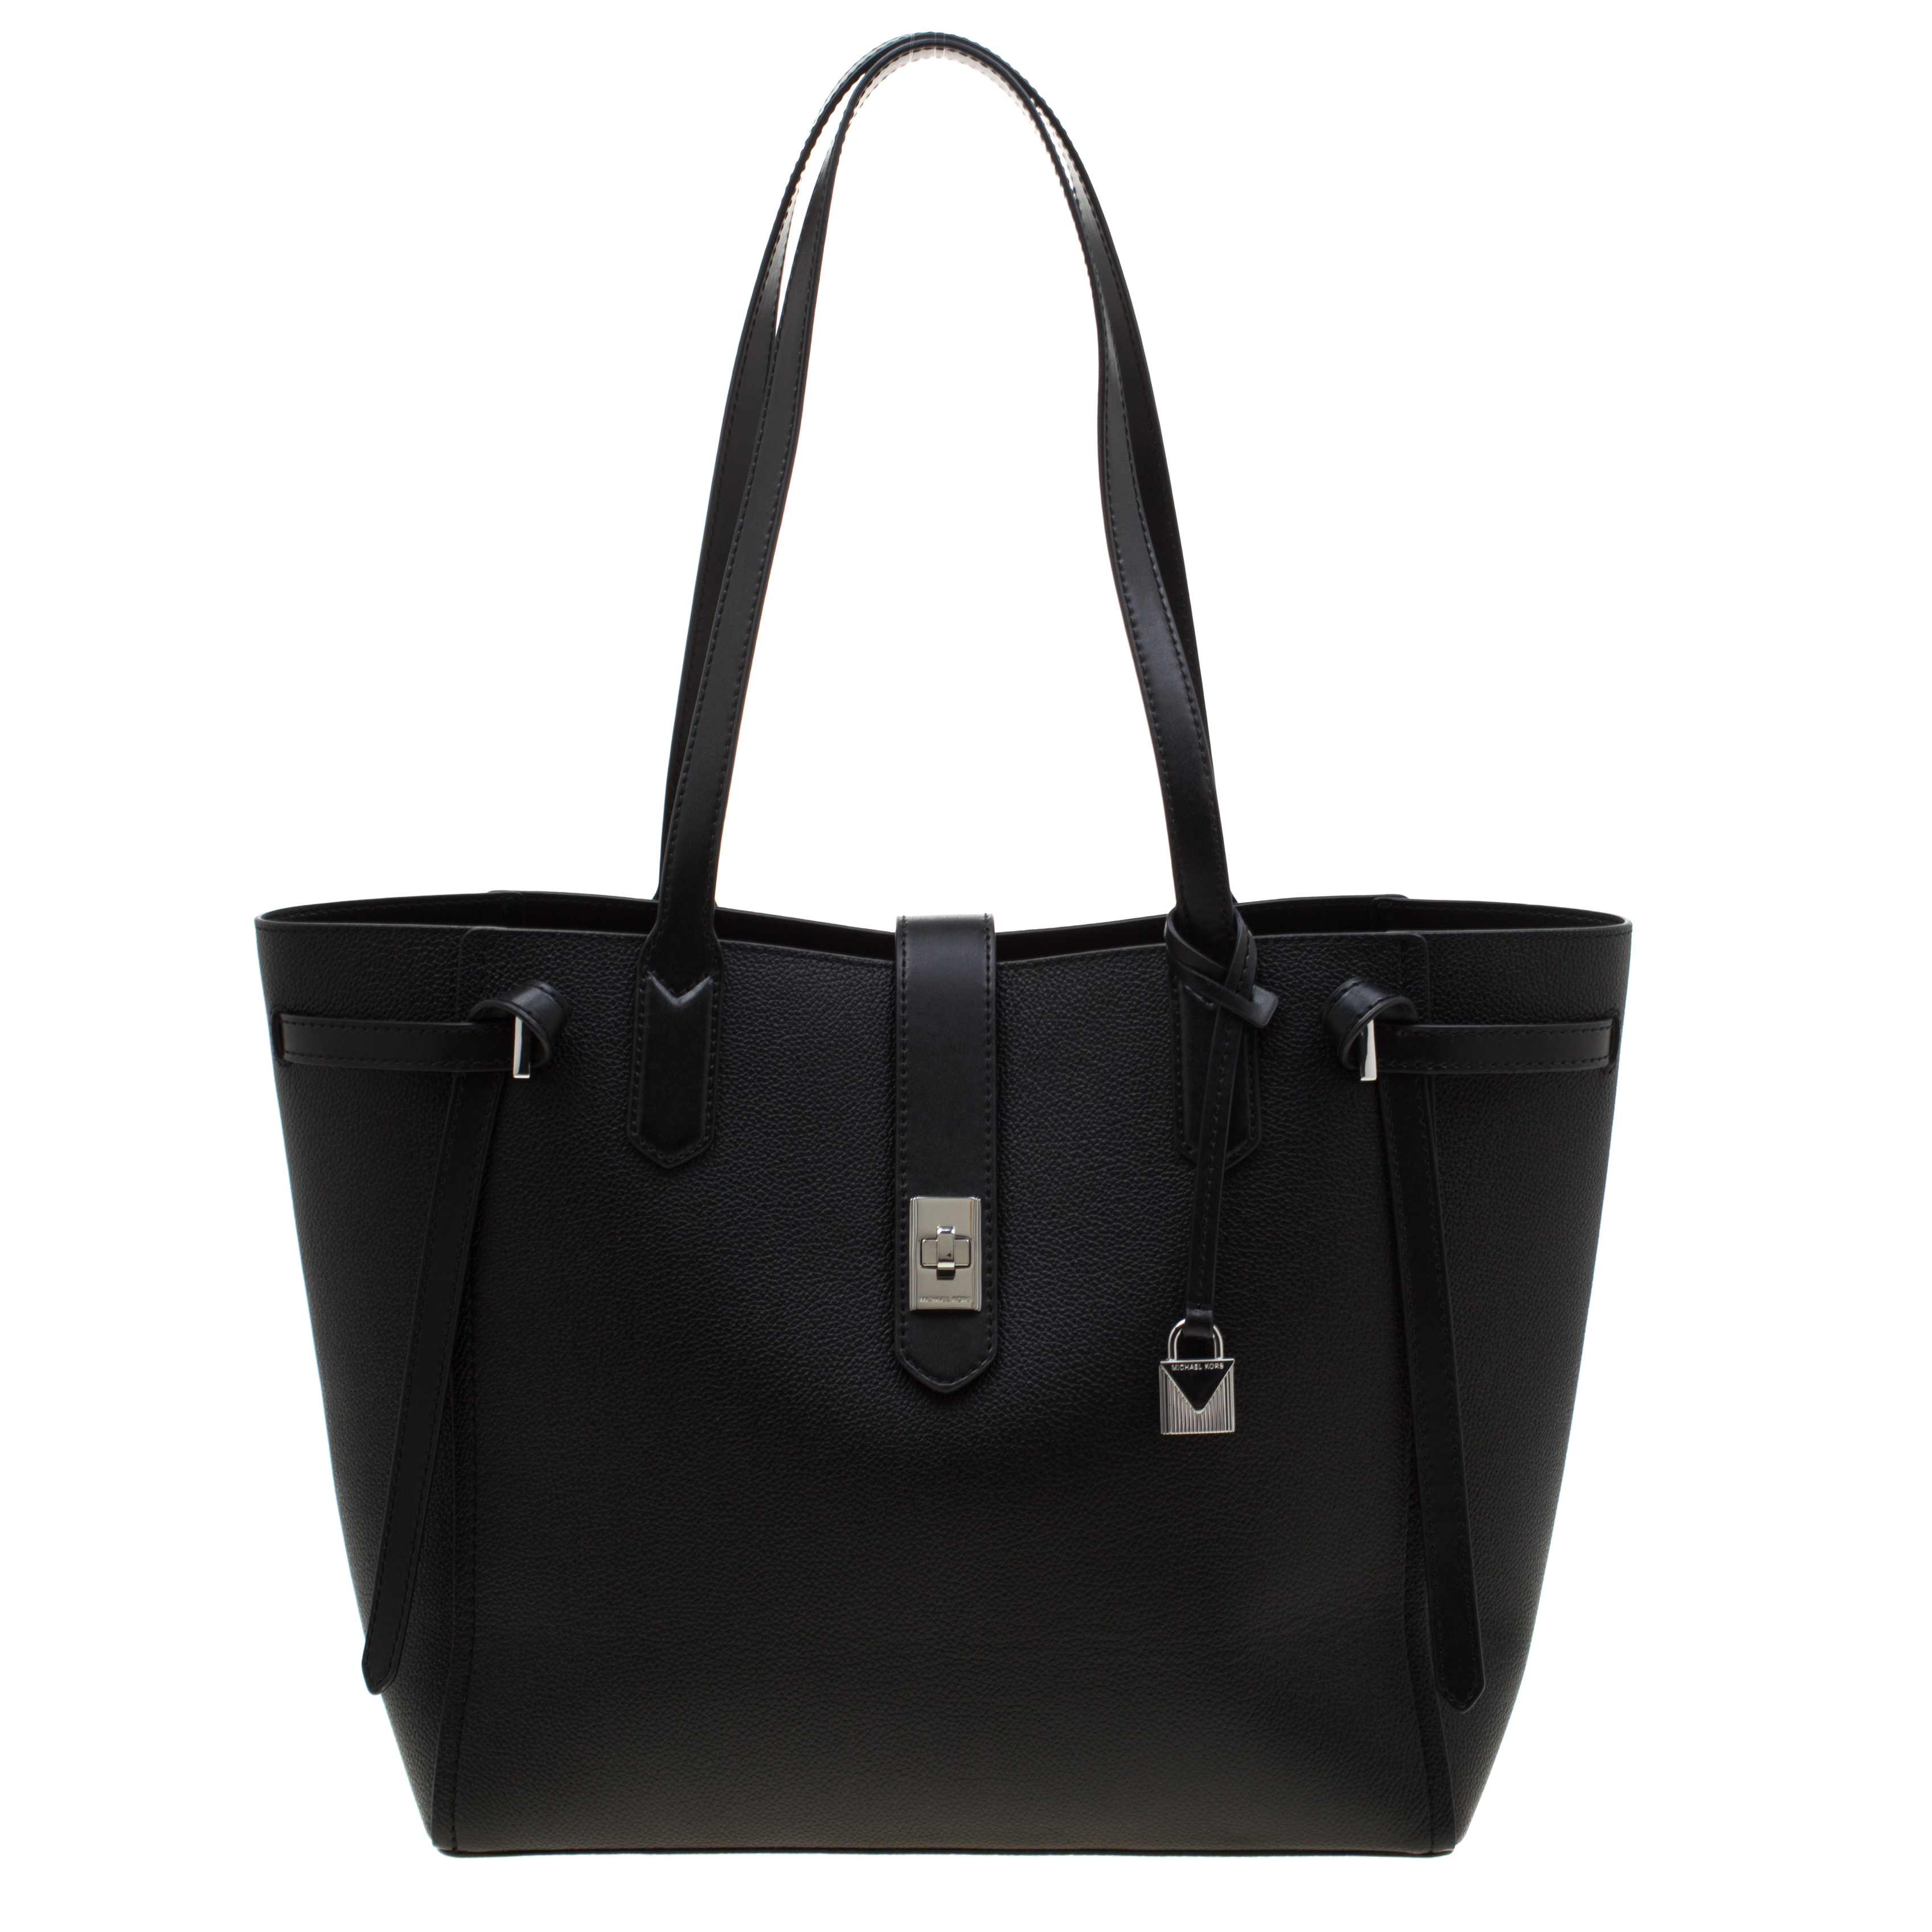 Michael Kors Black Leather Large Cassie Tote